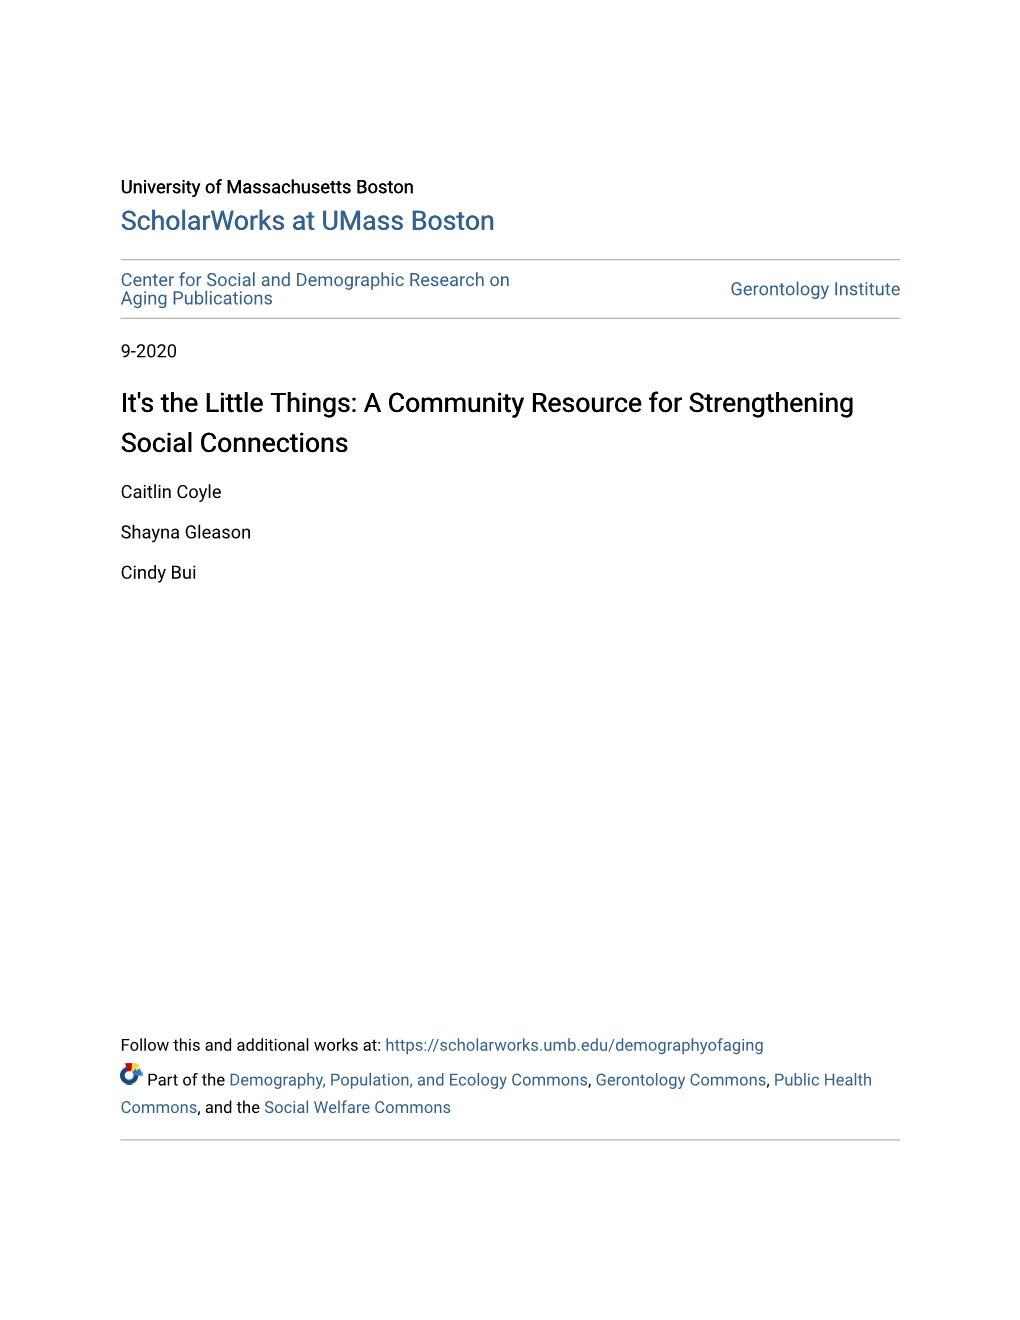 It's the Little Things: a Community Resource for Strengthening Social Connections